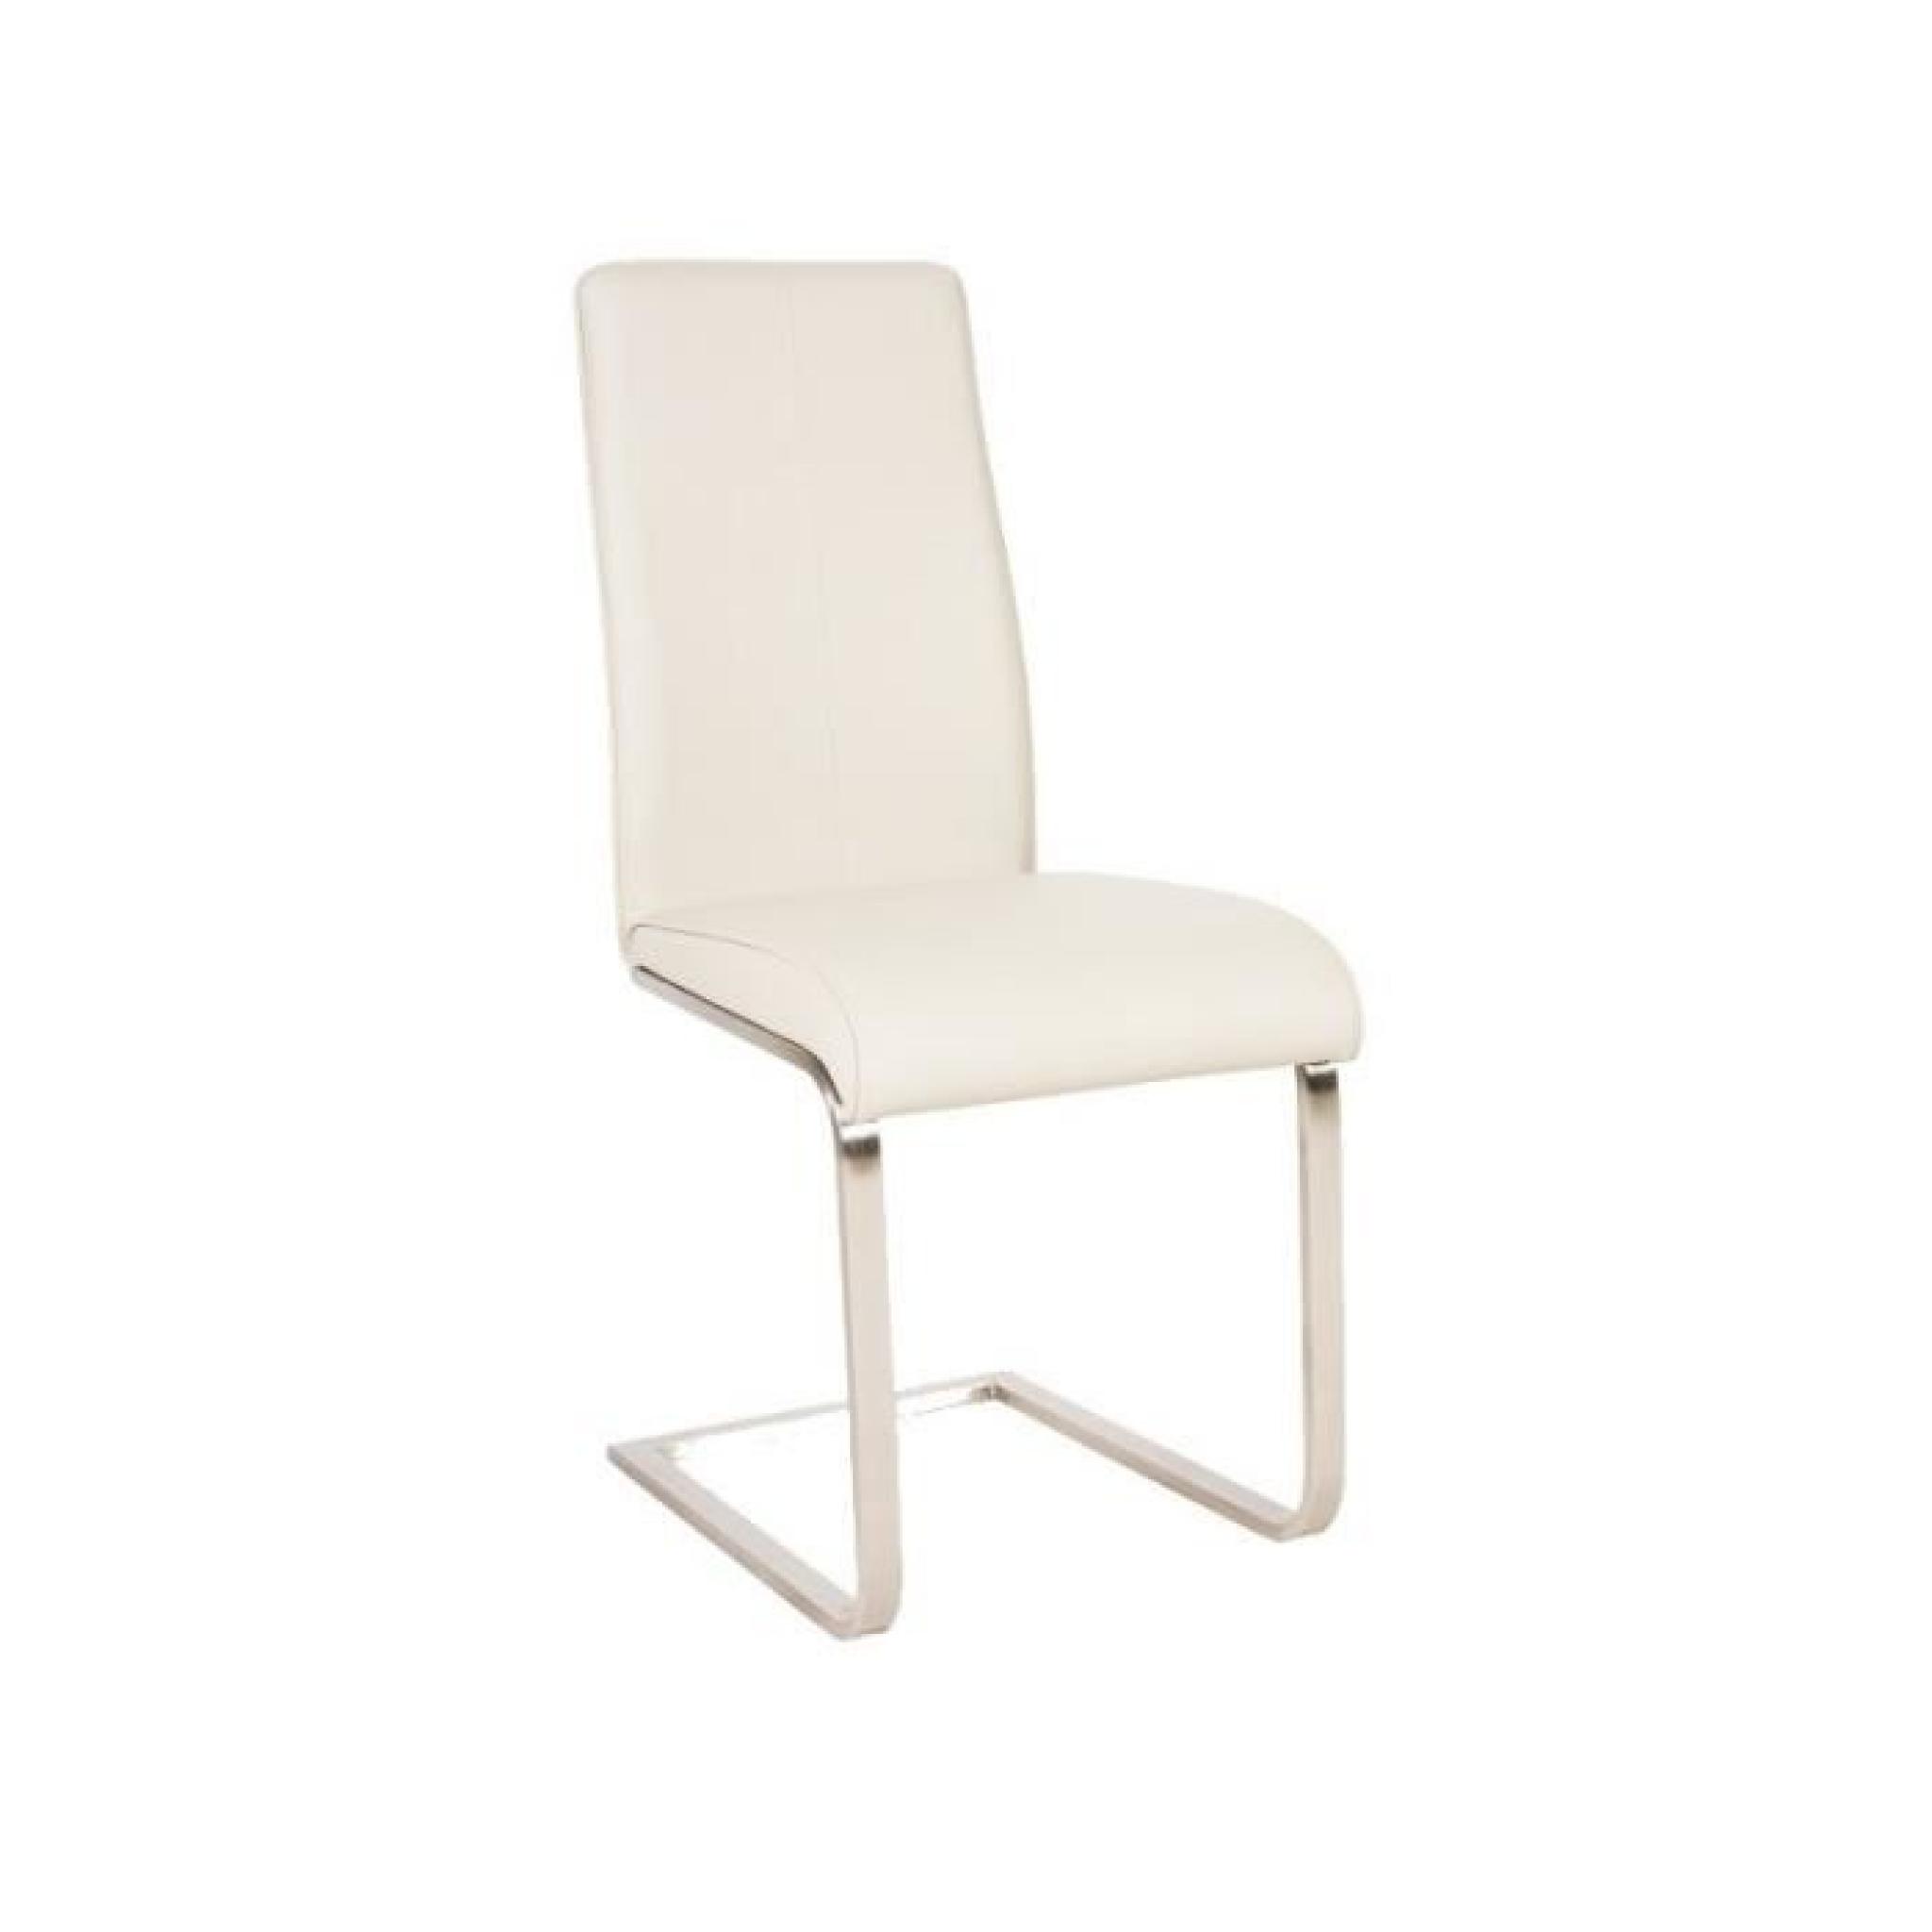 JUSThome H-856 Chaise Cappuccino 100 x 42 x 44